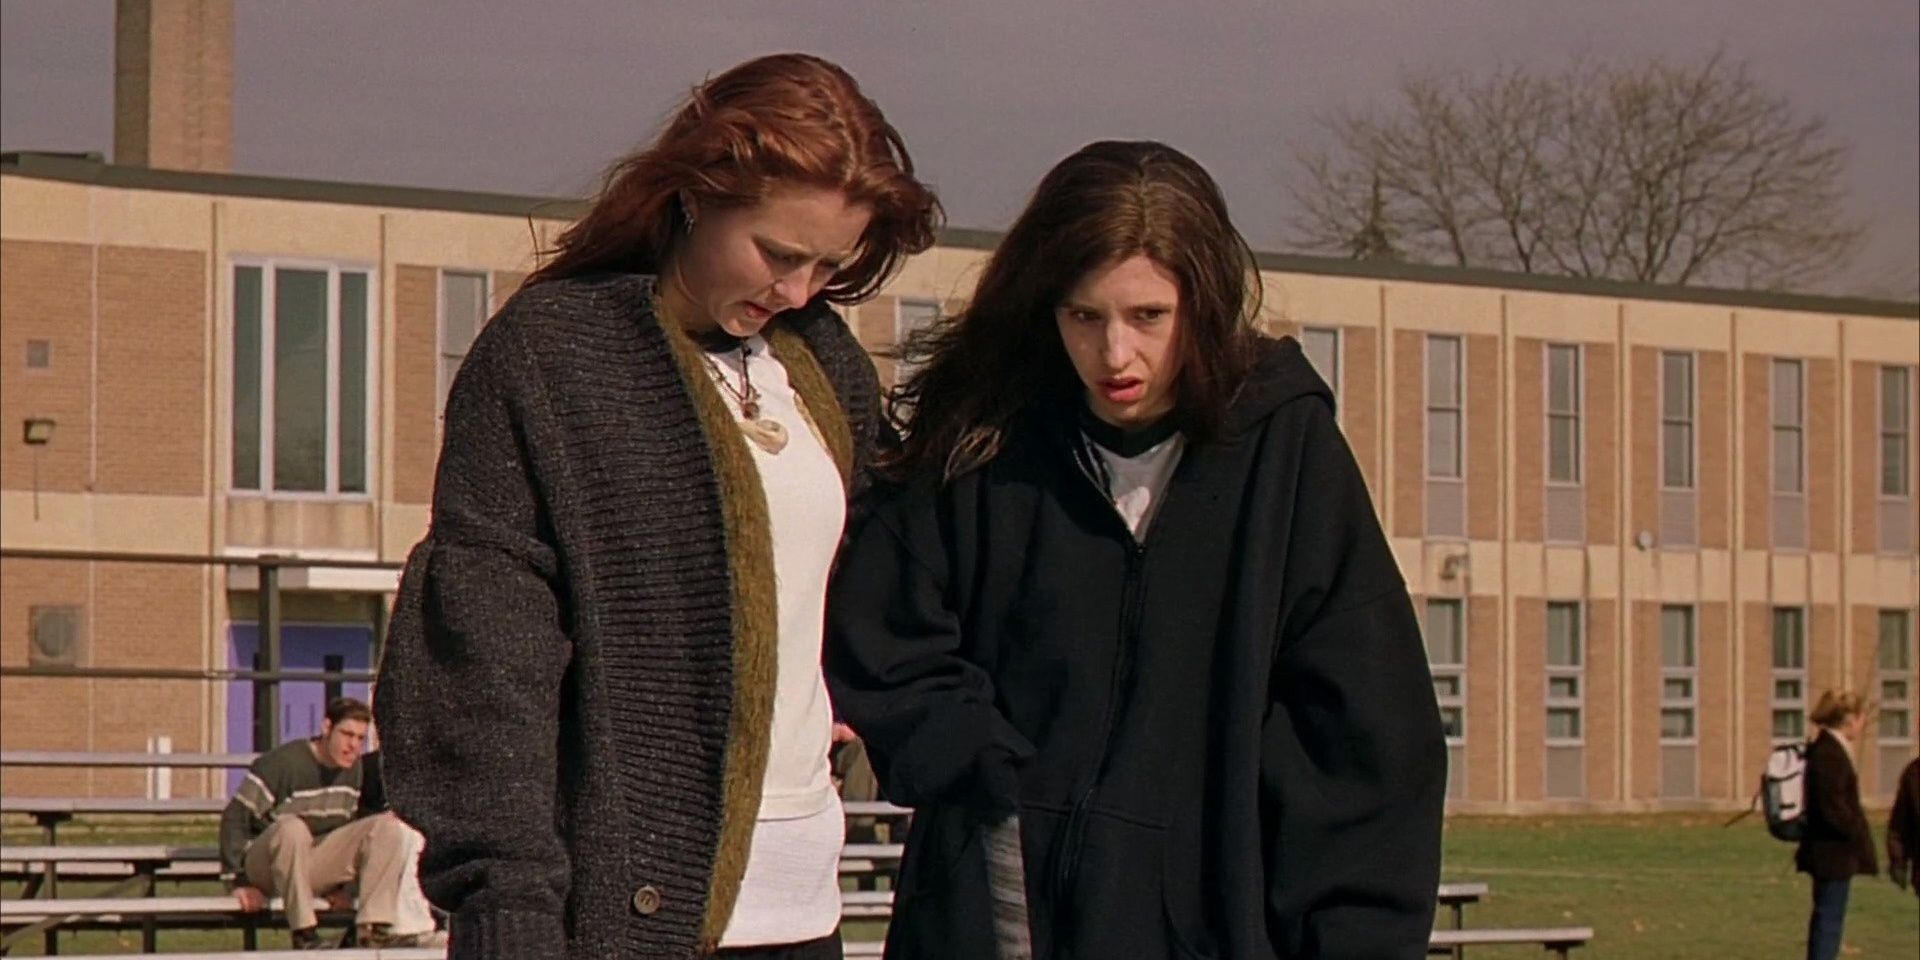 Ginger and Bridget outside their school in Ginger Snaps